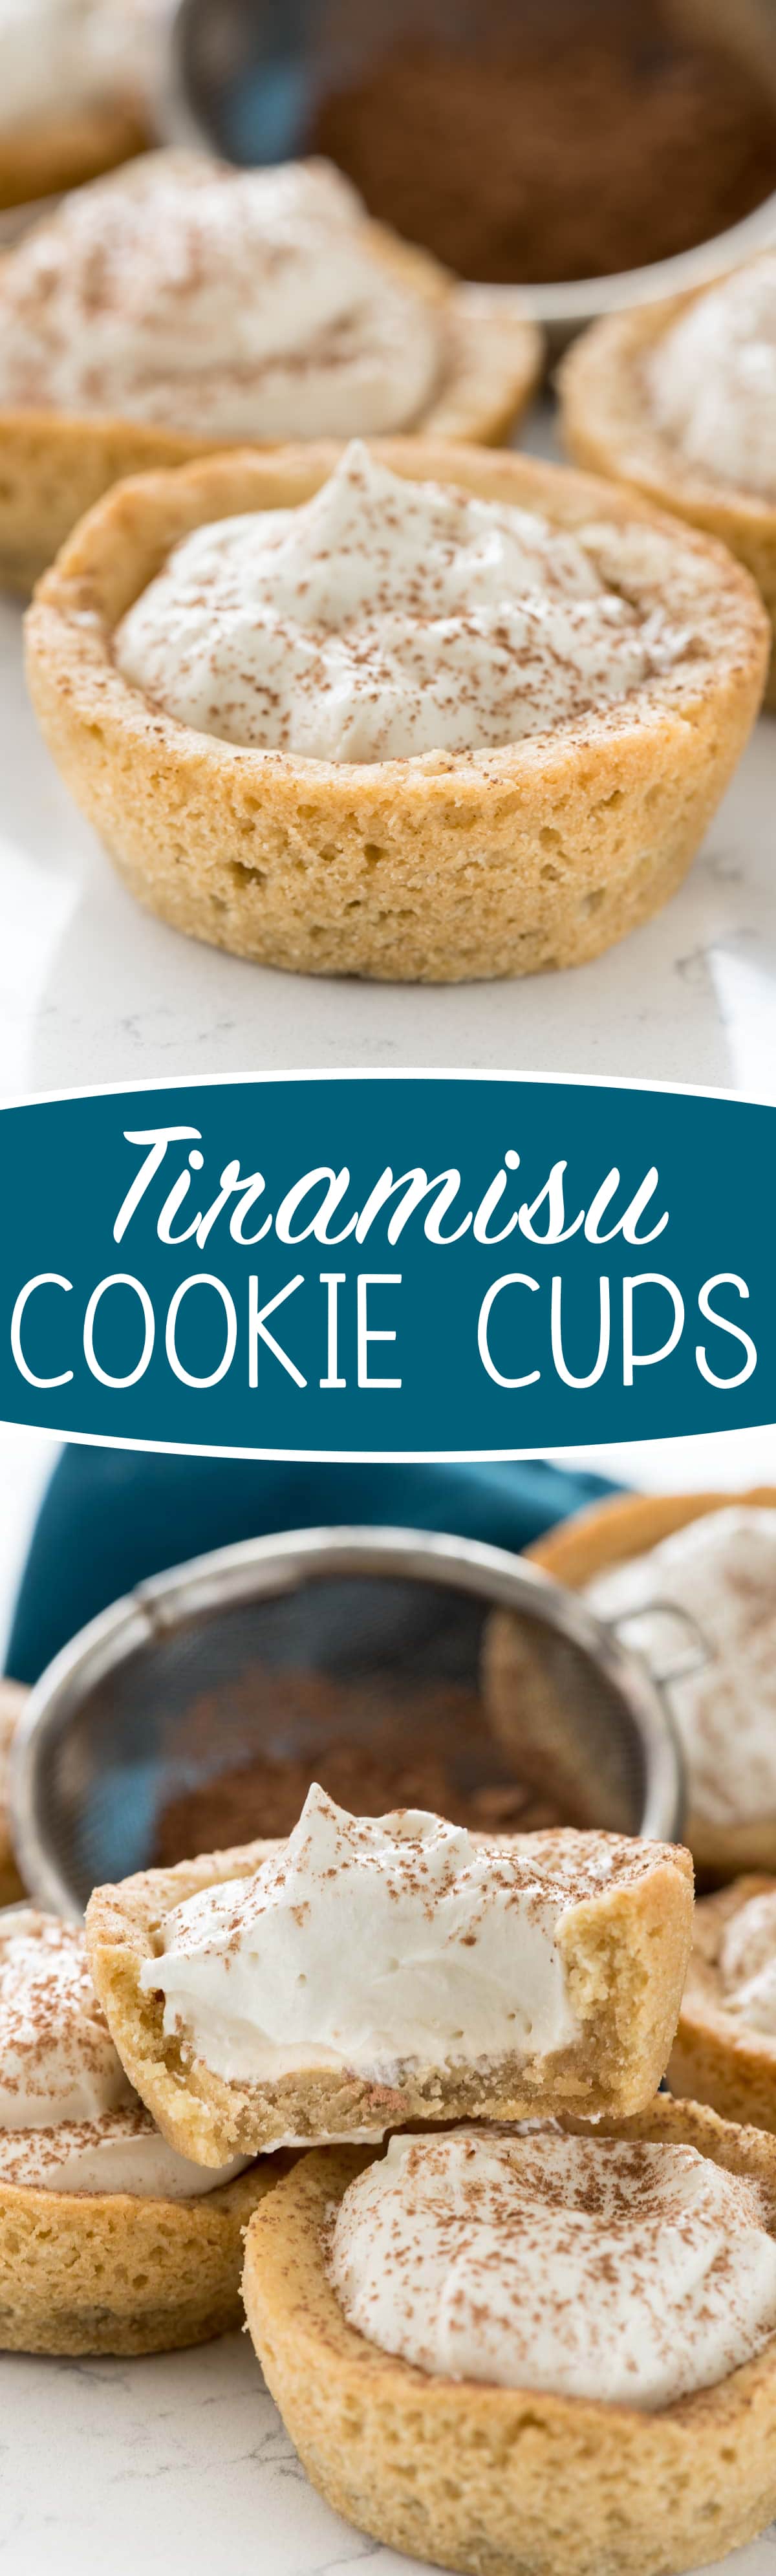 Tiramisu Cookie Cups - these easy from scratch sugar cookie cups are filled with my favorite tiramisu mousse! My family loved them!